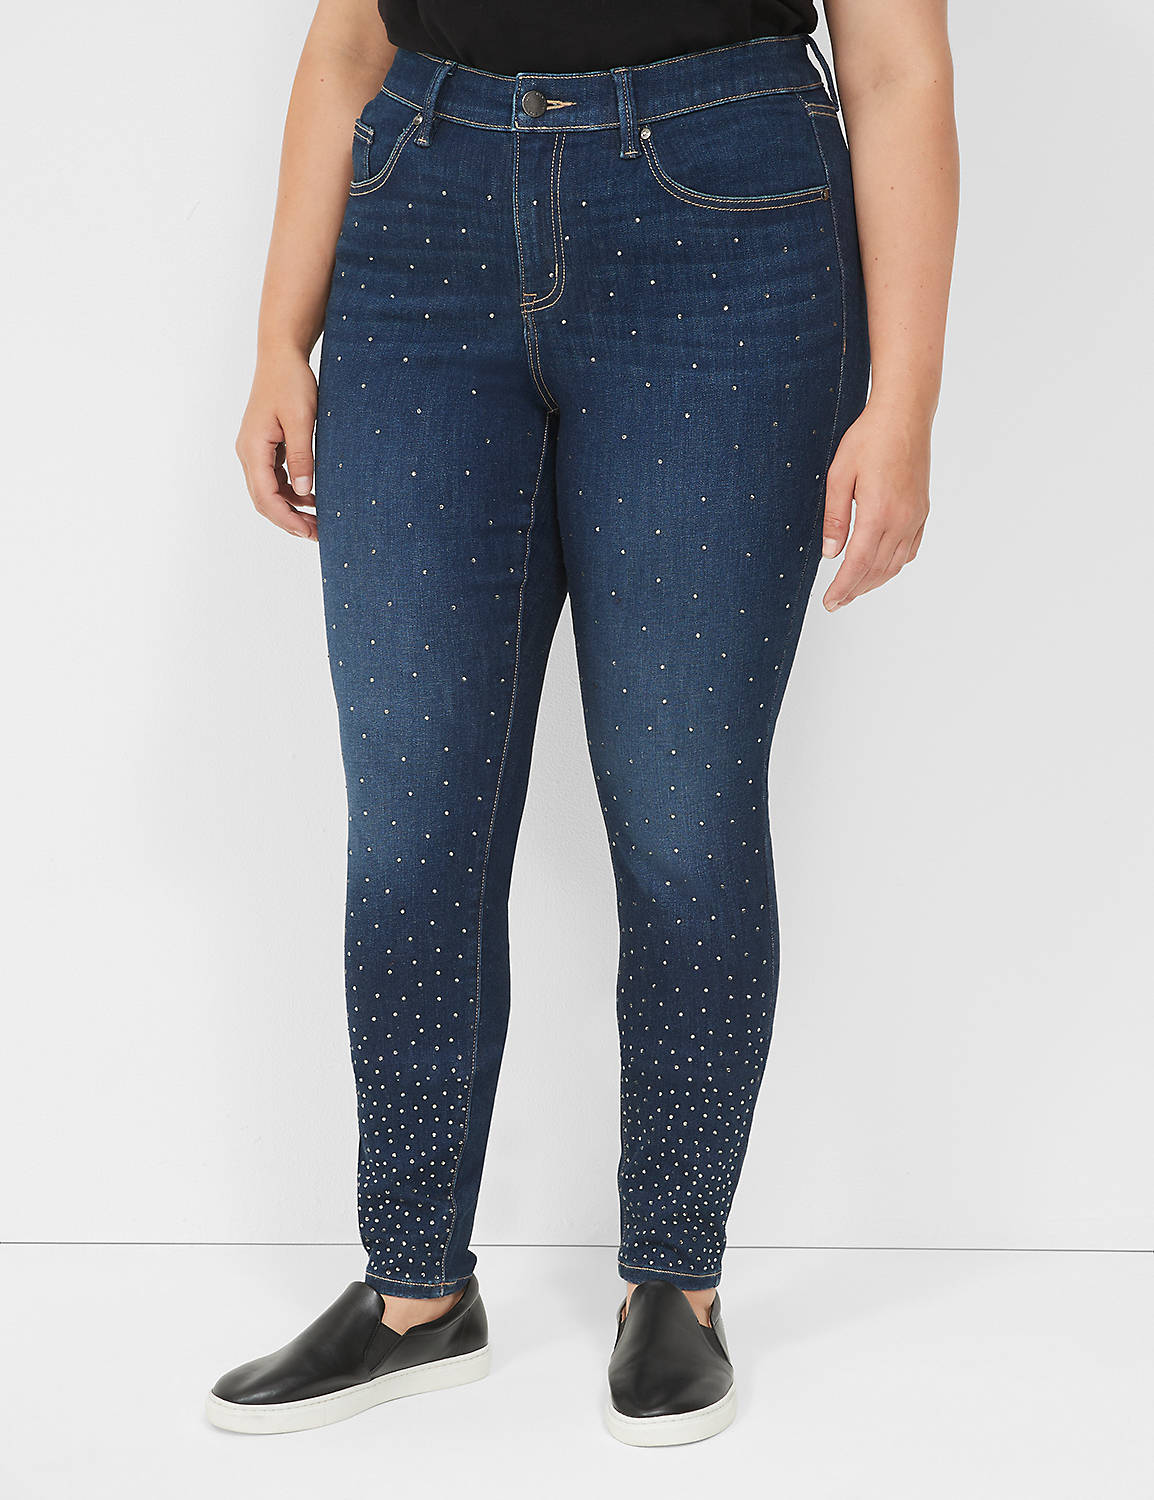 SIGNATURE MID RISE SKINNY - ALLOVER Product Image 1